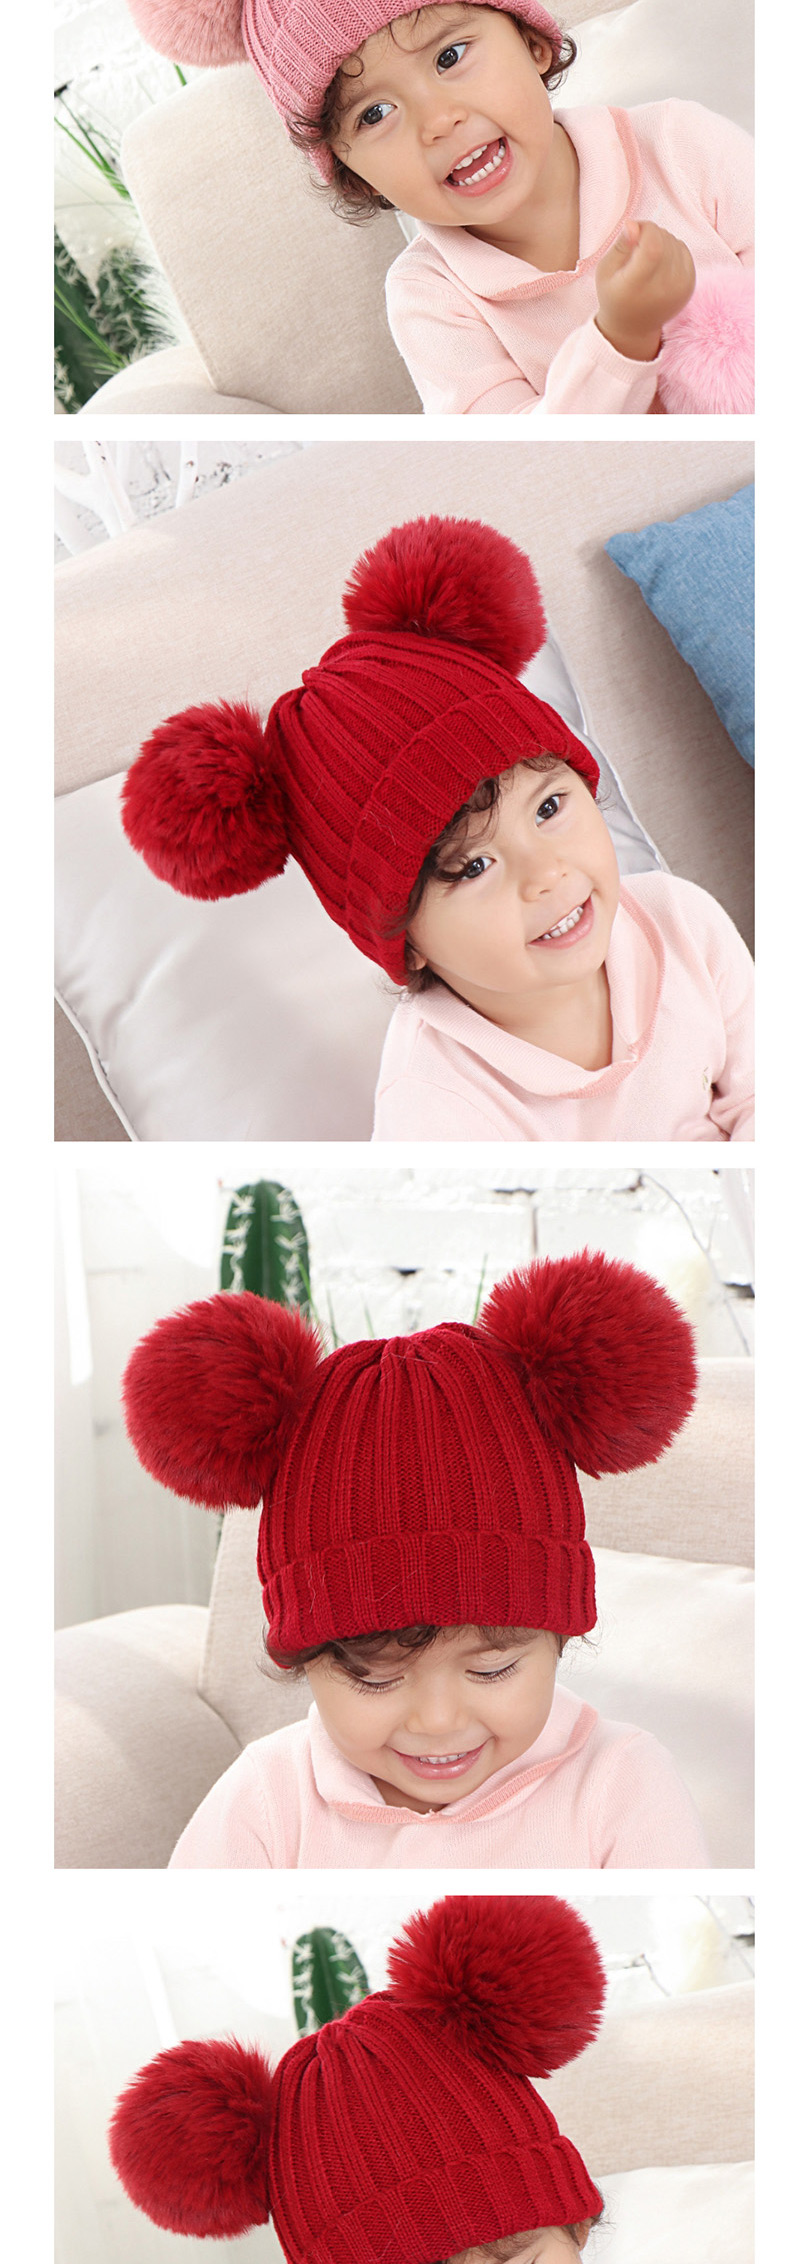 Fashion Wine Red Threaded Double-hair Ball Knitted Baby Hat,Children